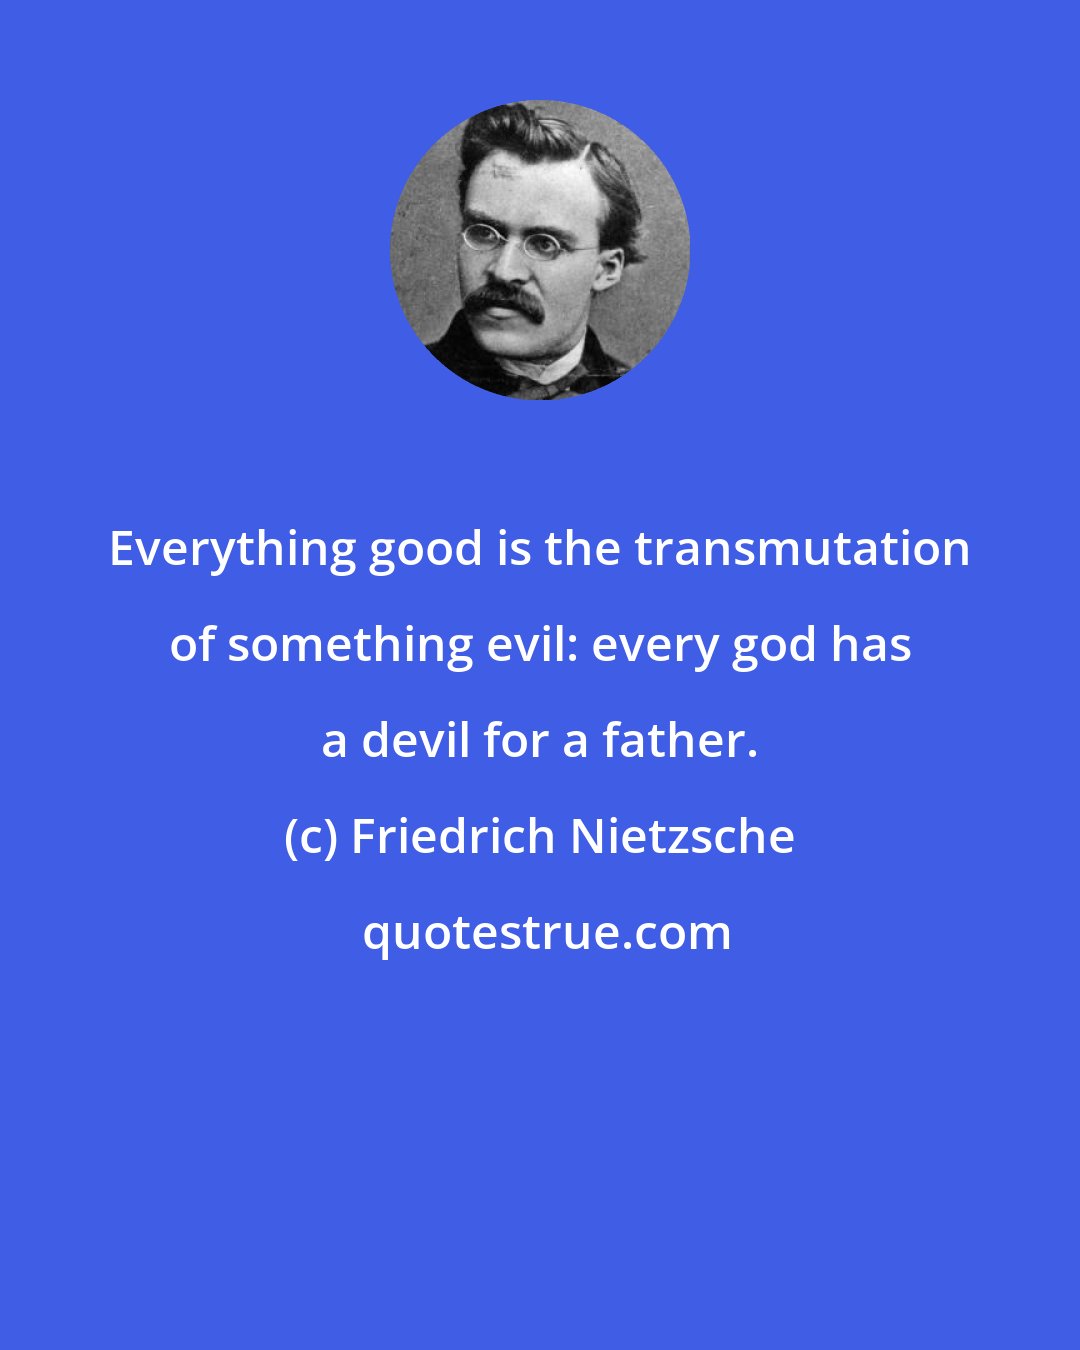 Friedrich Nietzsche: Everything good is the transmutation of something evil: every god has a devil for a father.